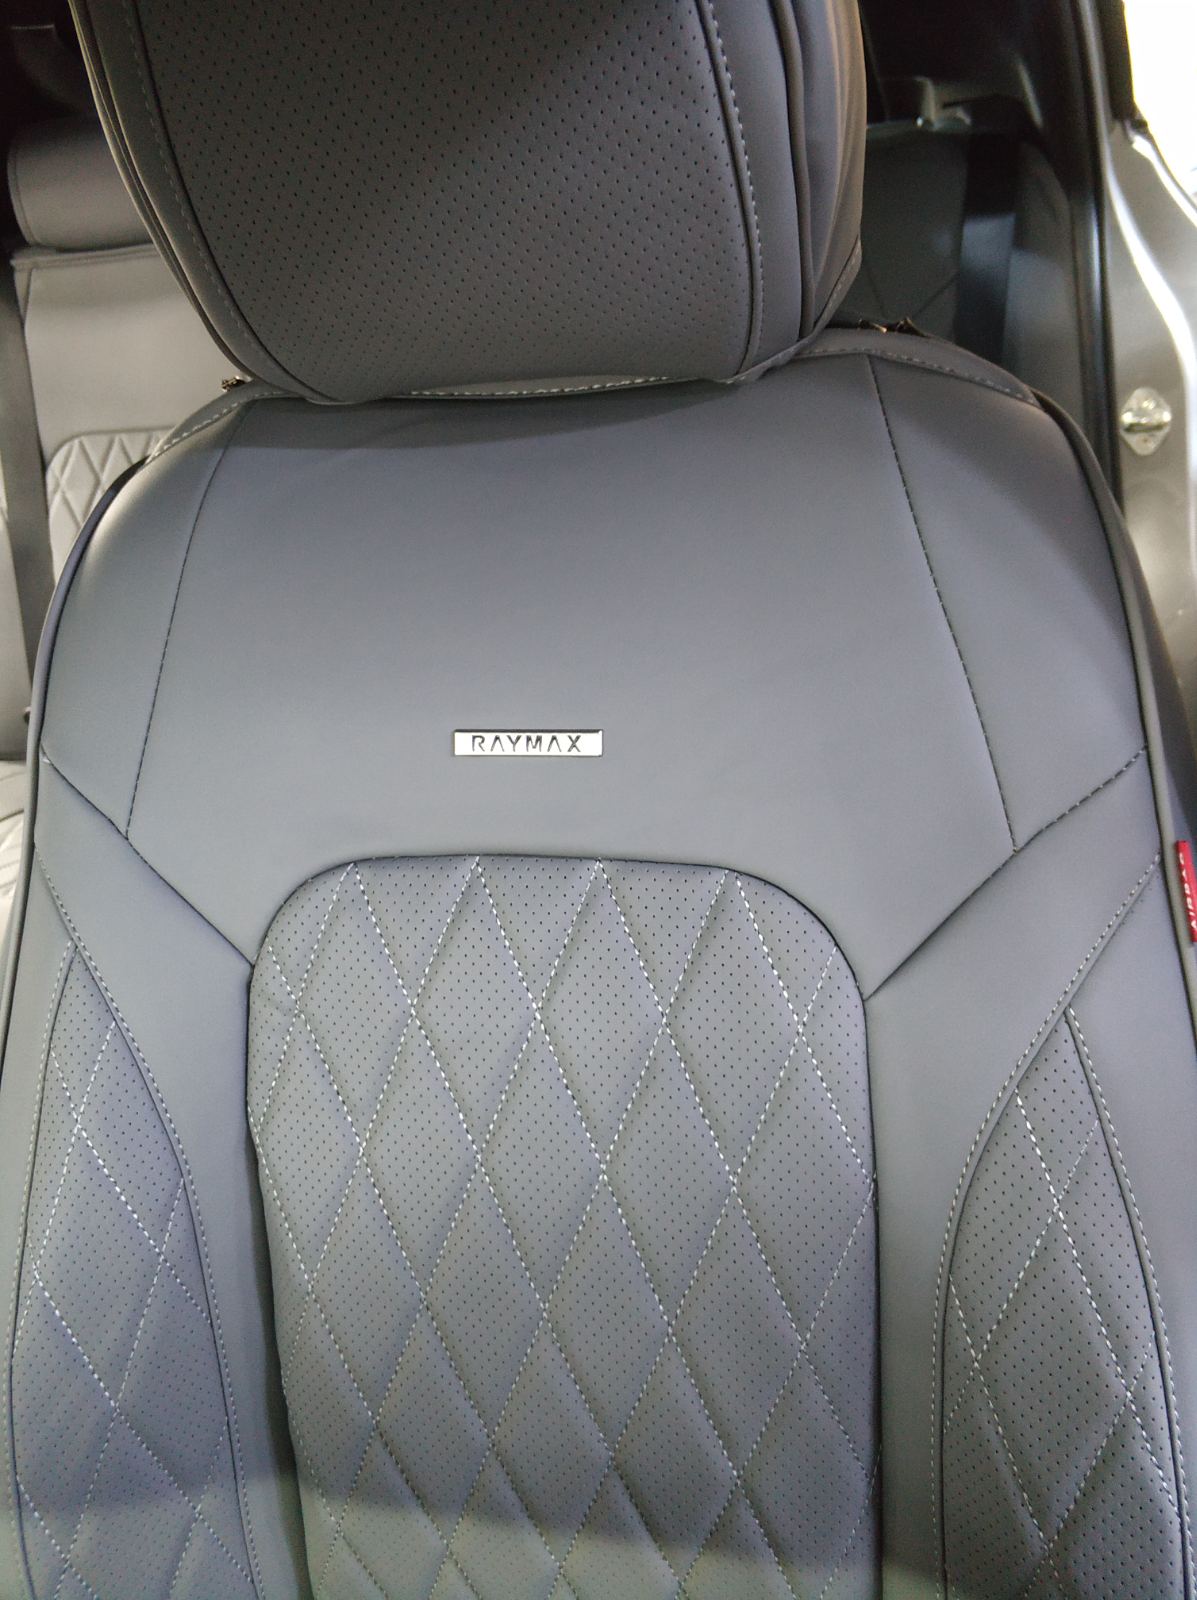 RAYMAX LUXURY SEAT COVER (H-23CX-08) (1) SET (GREY)